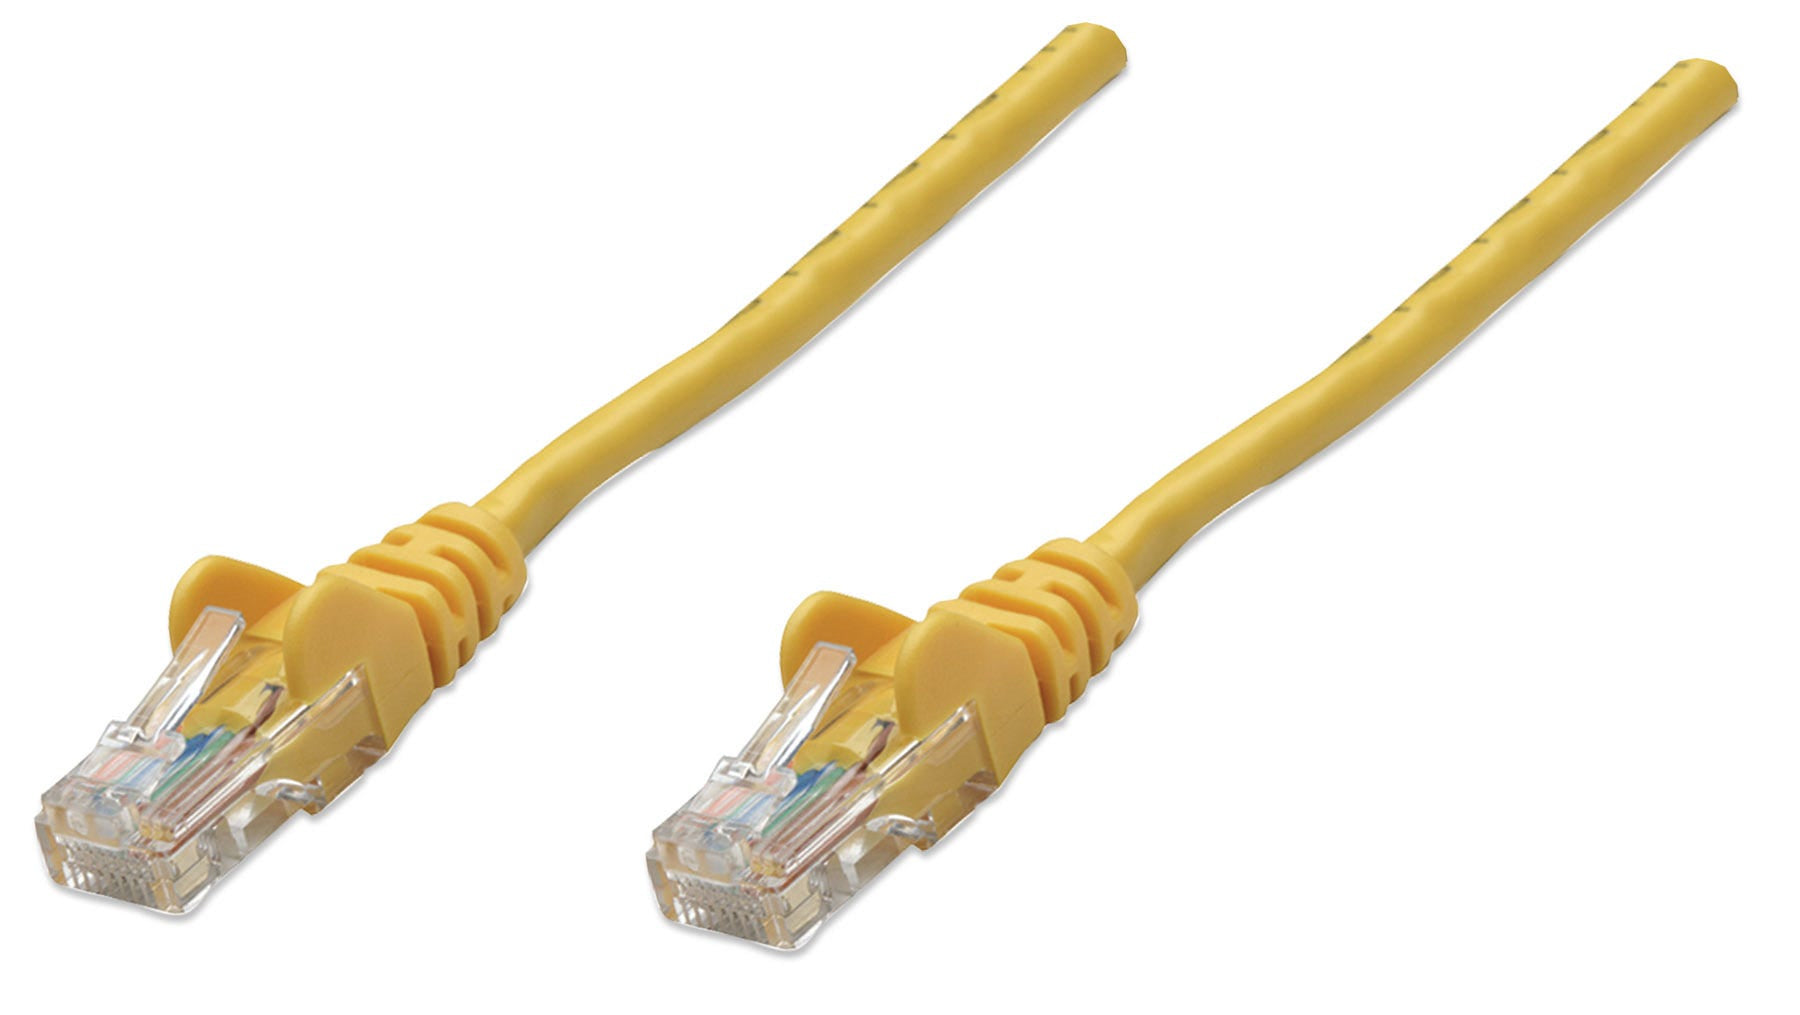 Intellinet Network Patch Cable, Cat5e, 2m, Yellow, CCA, U/UTP, PVC, RJ45, Gold Plated Contacts, Snagless, Booted, Lifetime Warranty, Polybag